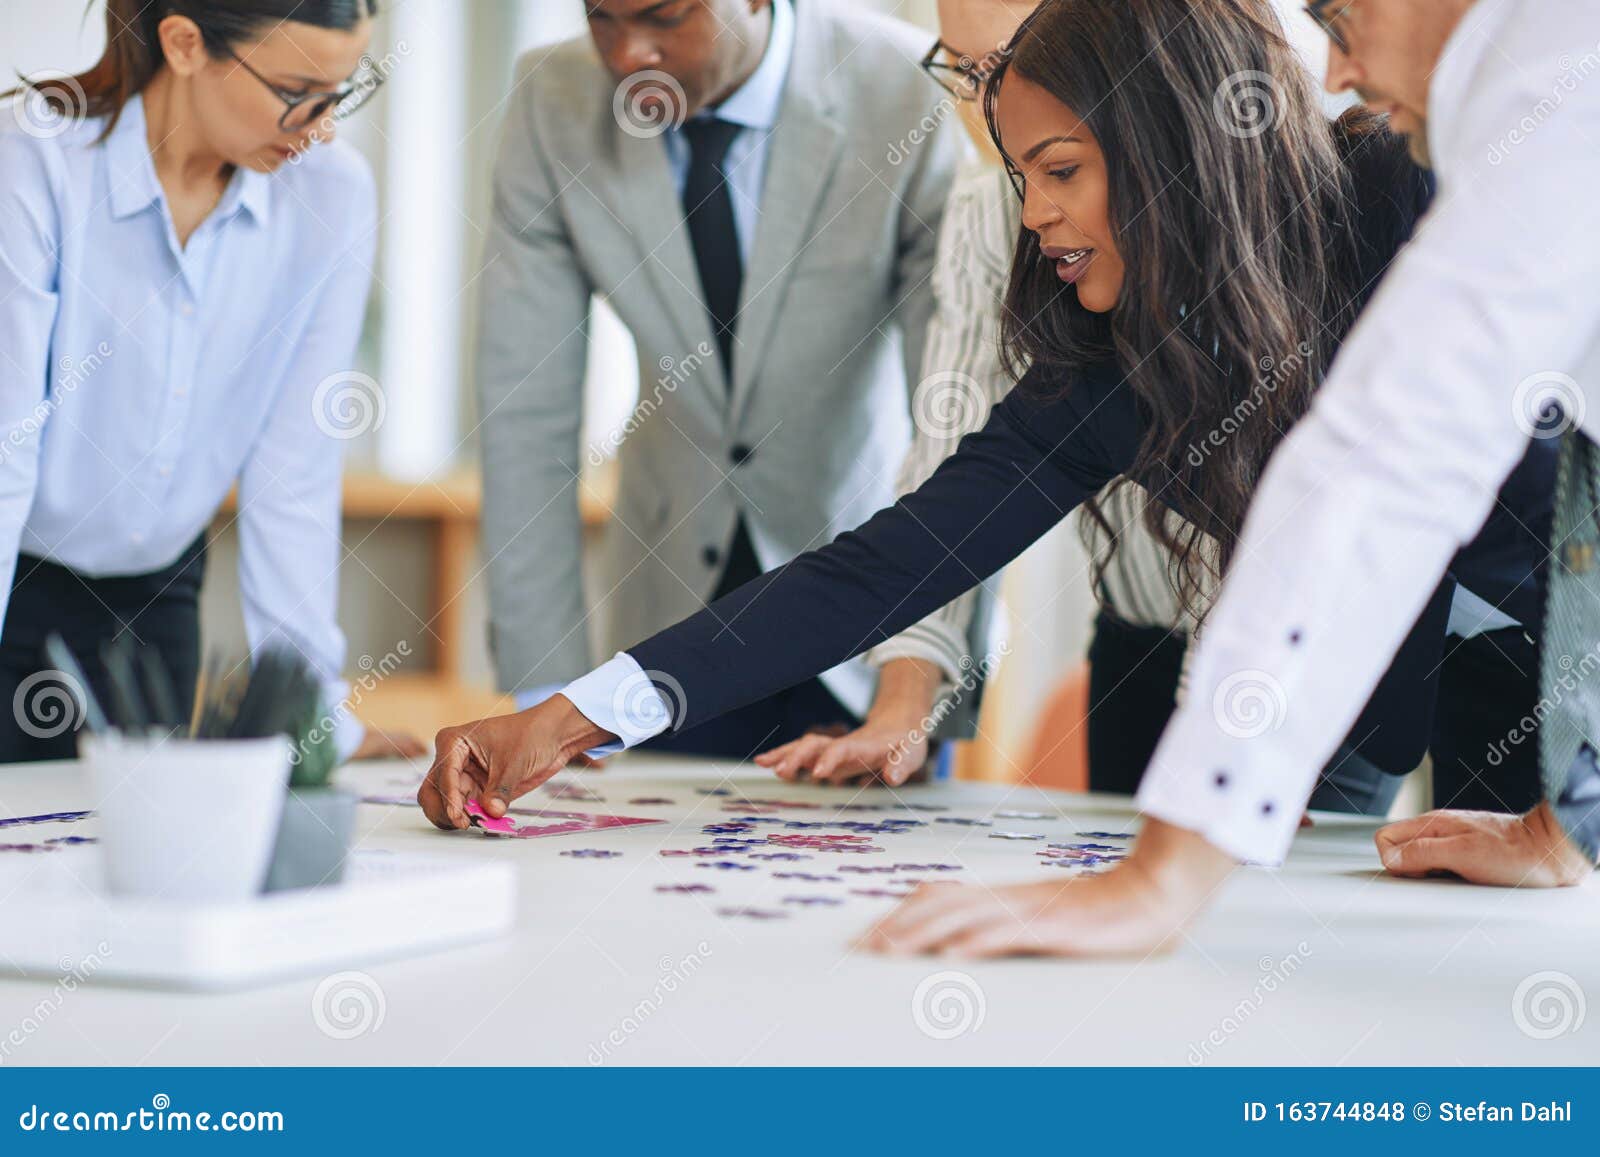 diverse businesspeople standing in a boardroom solving a jigsaw